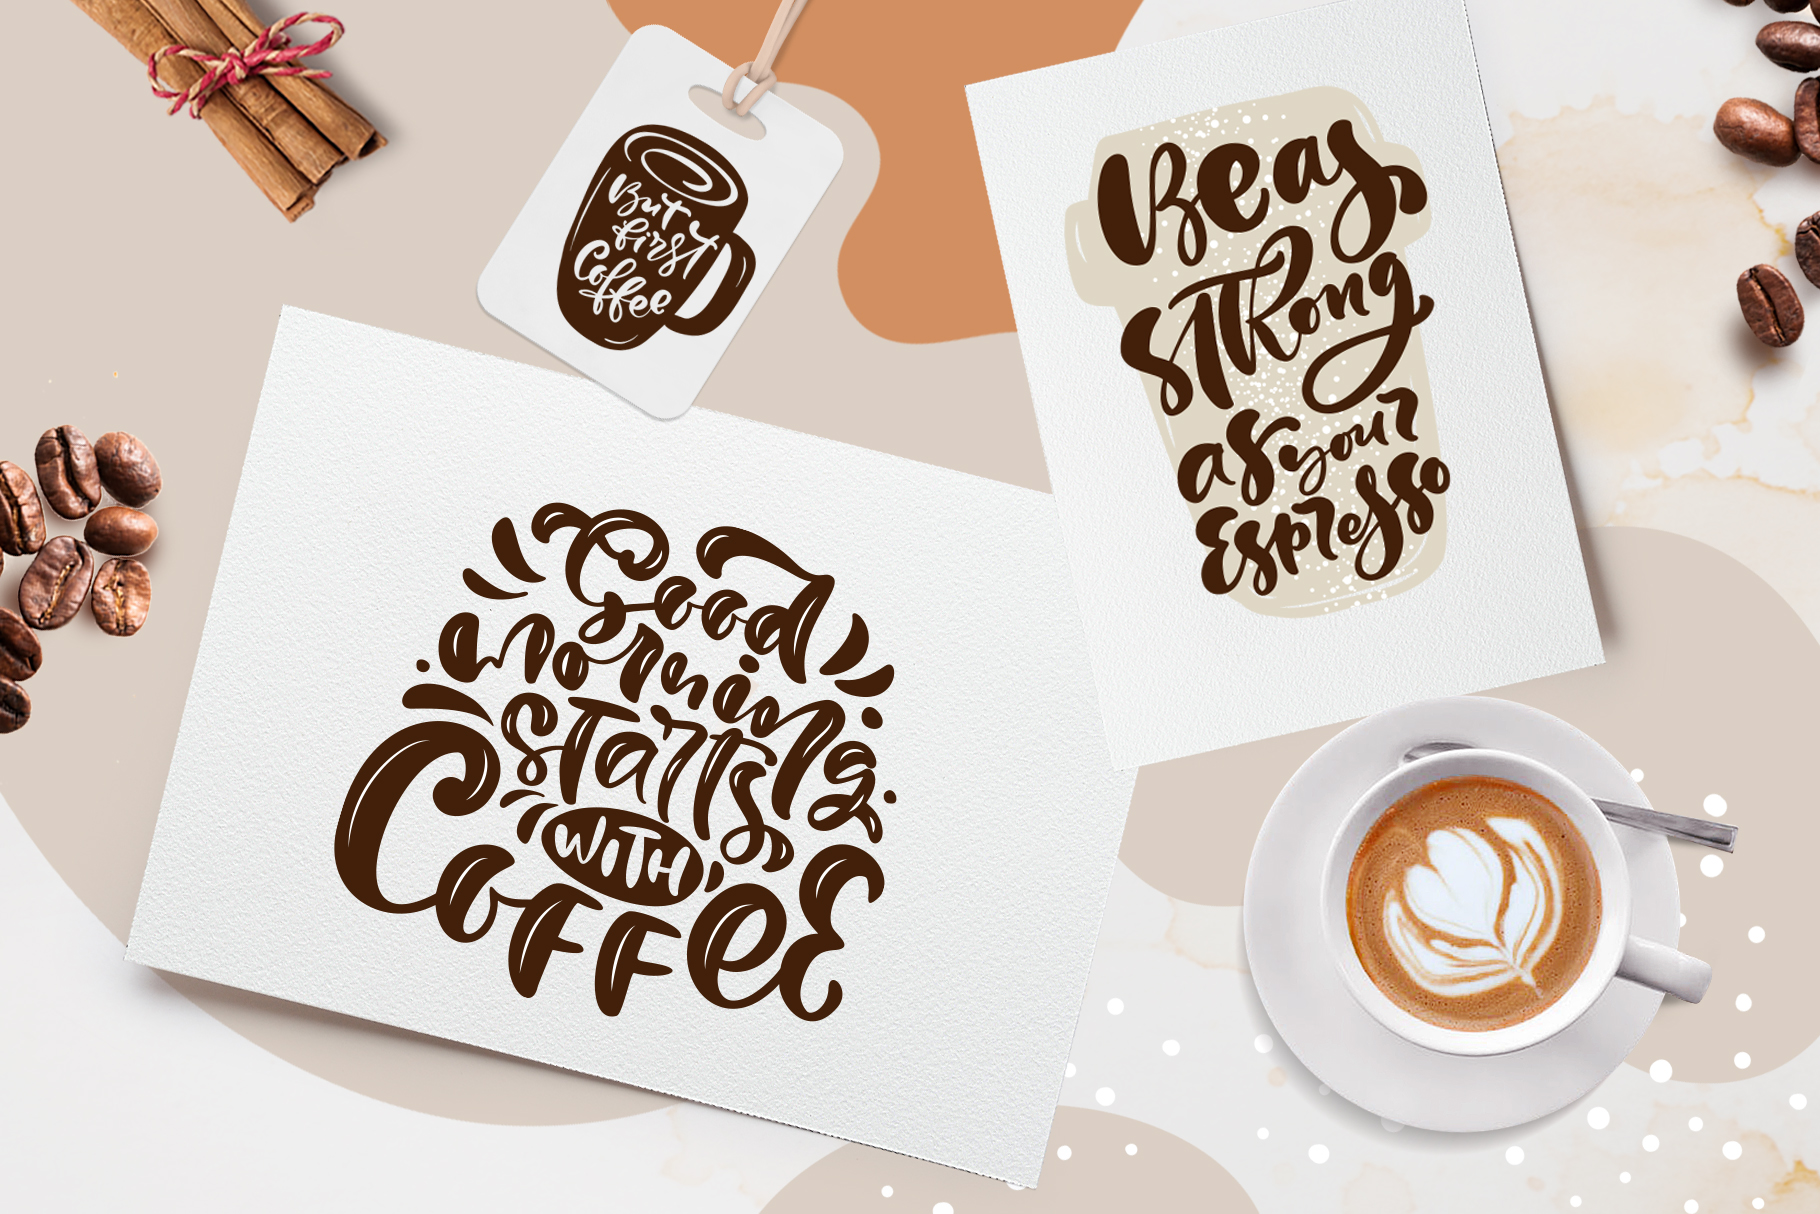 Coffee Lettering